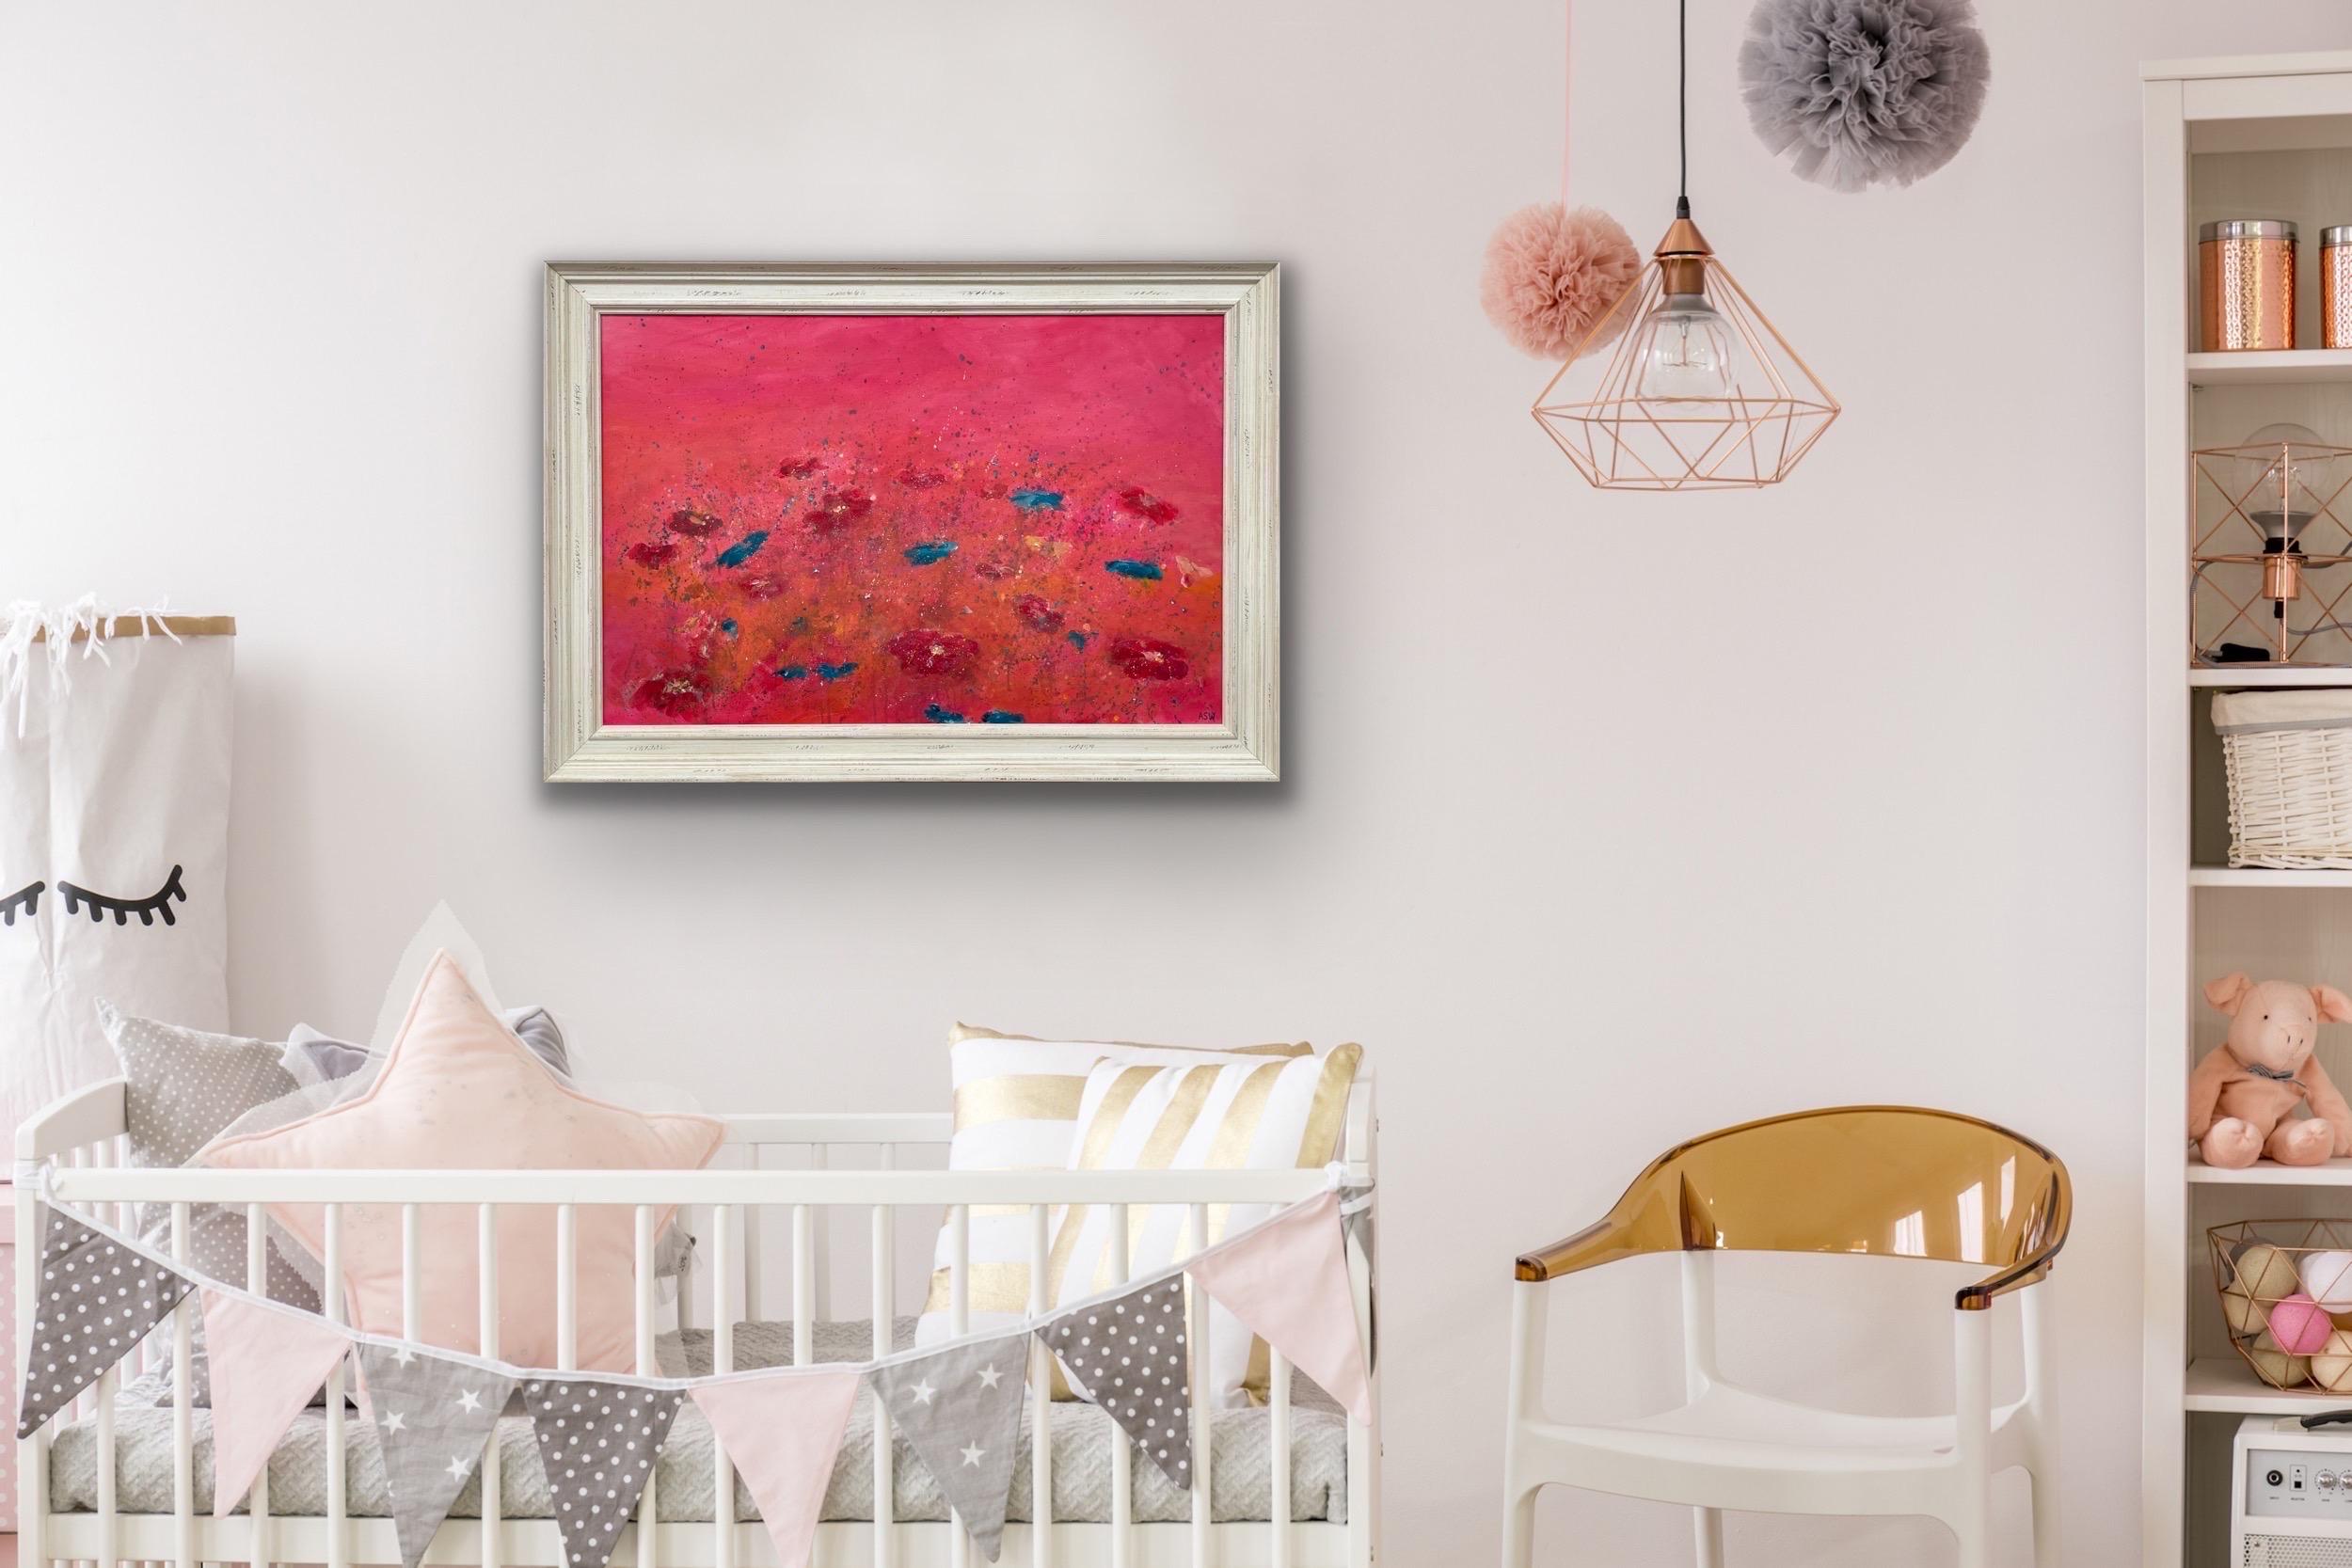 Painting of Abstract Turquoise & Red Flowers on a Pink Background by British Landscape Artist, Angela Wakefield. This original is from the 'Spring Burst' Interior Design Series. Framed in a high quality off-white shabby chic contemporary wooden